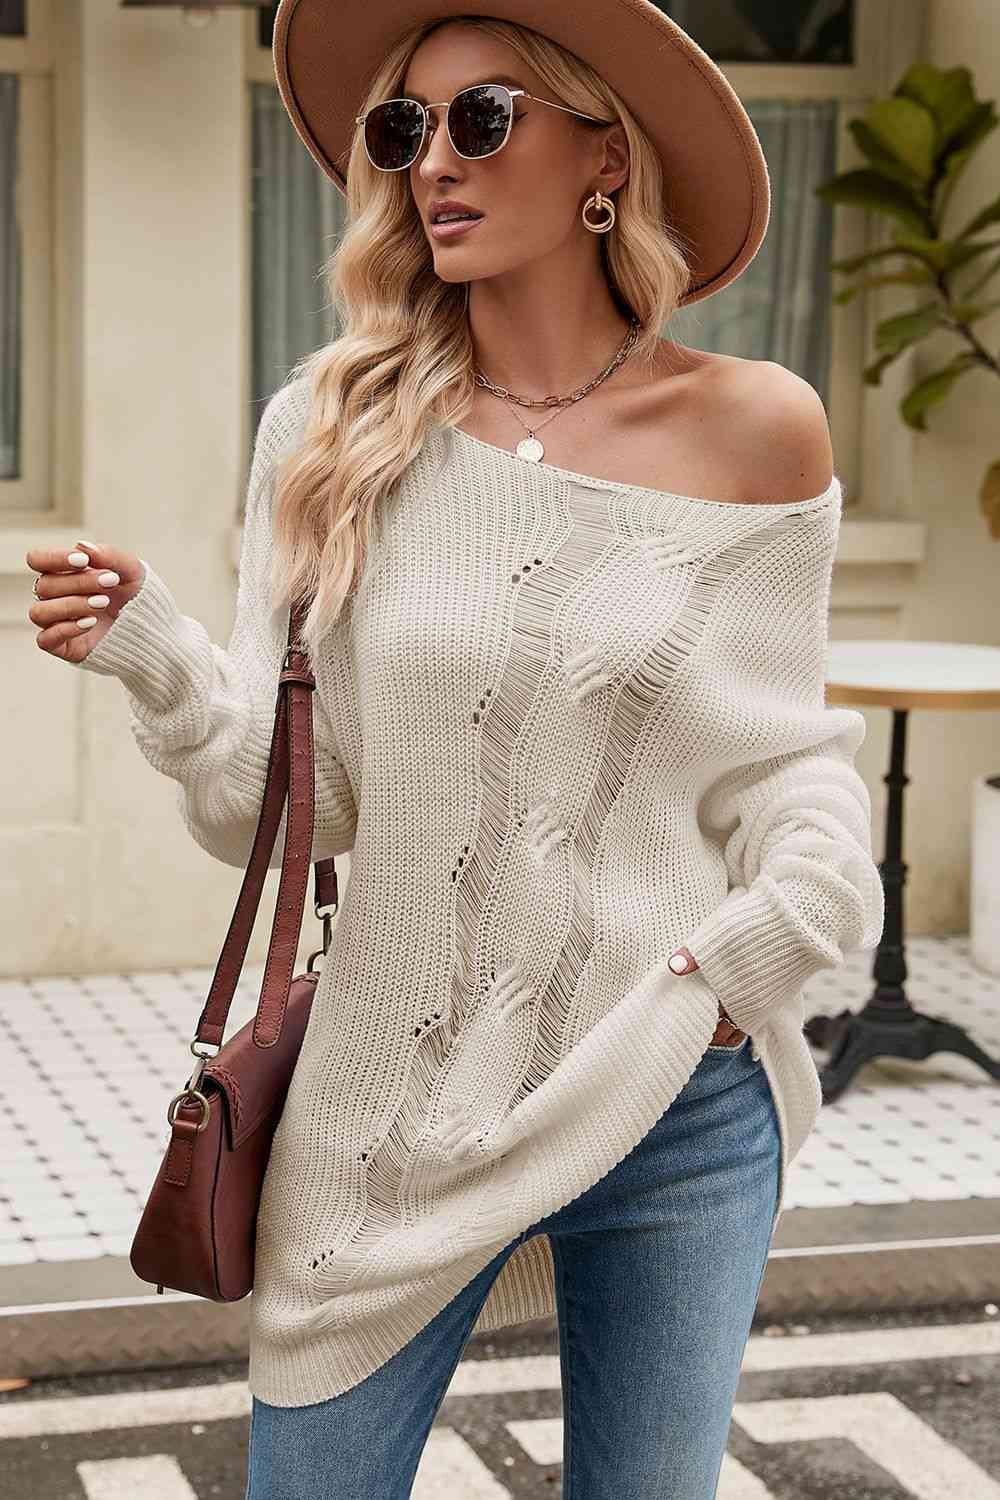 All This Time Boat Neck Dropped Shoulder Knit Top